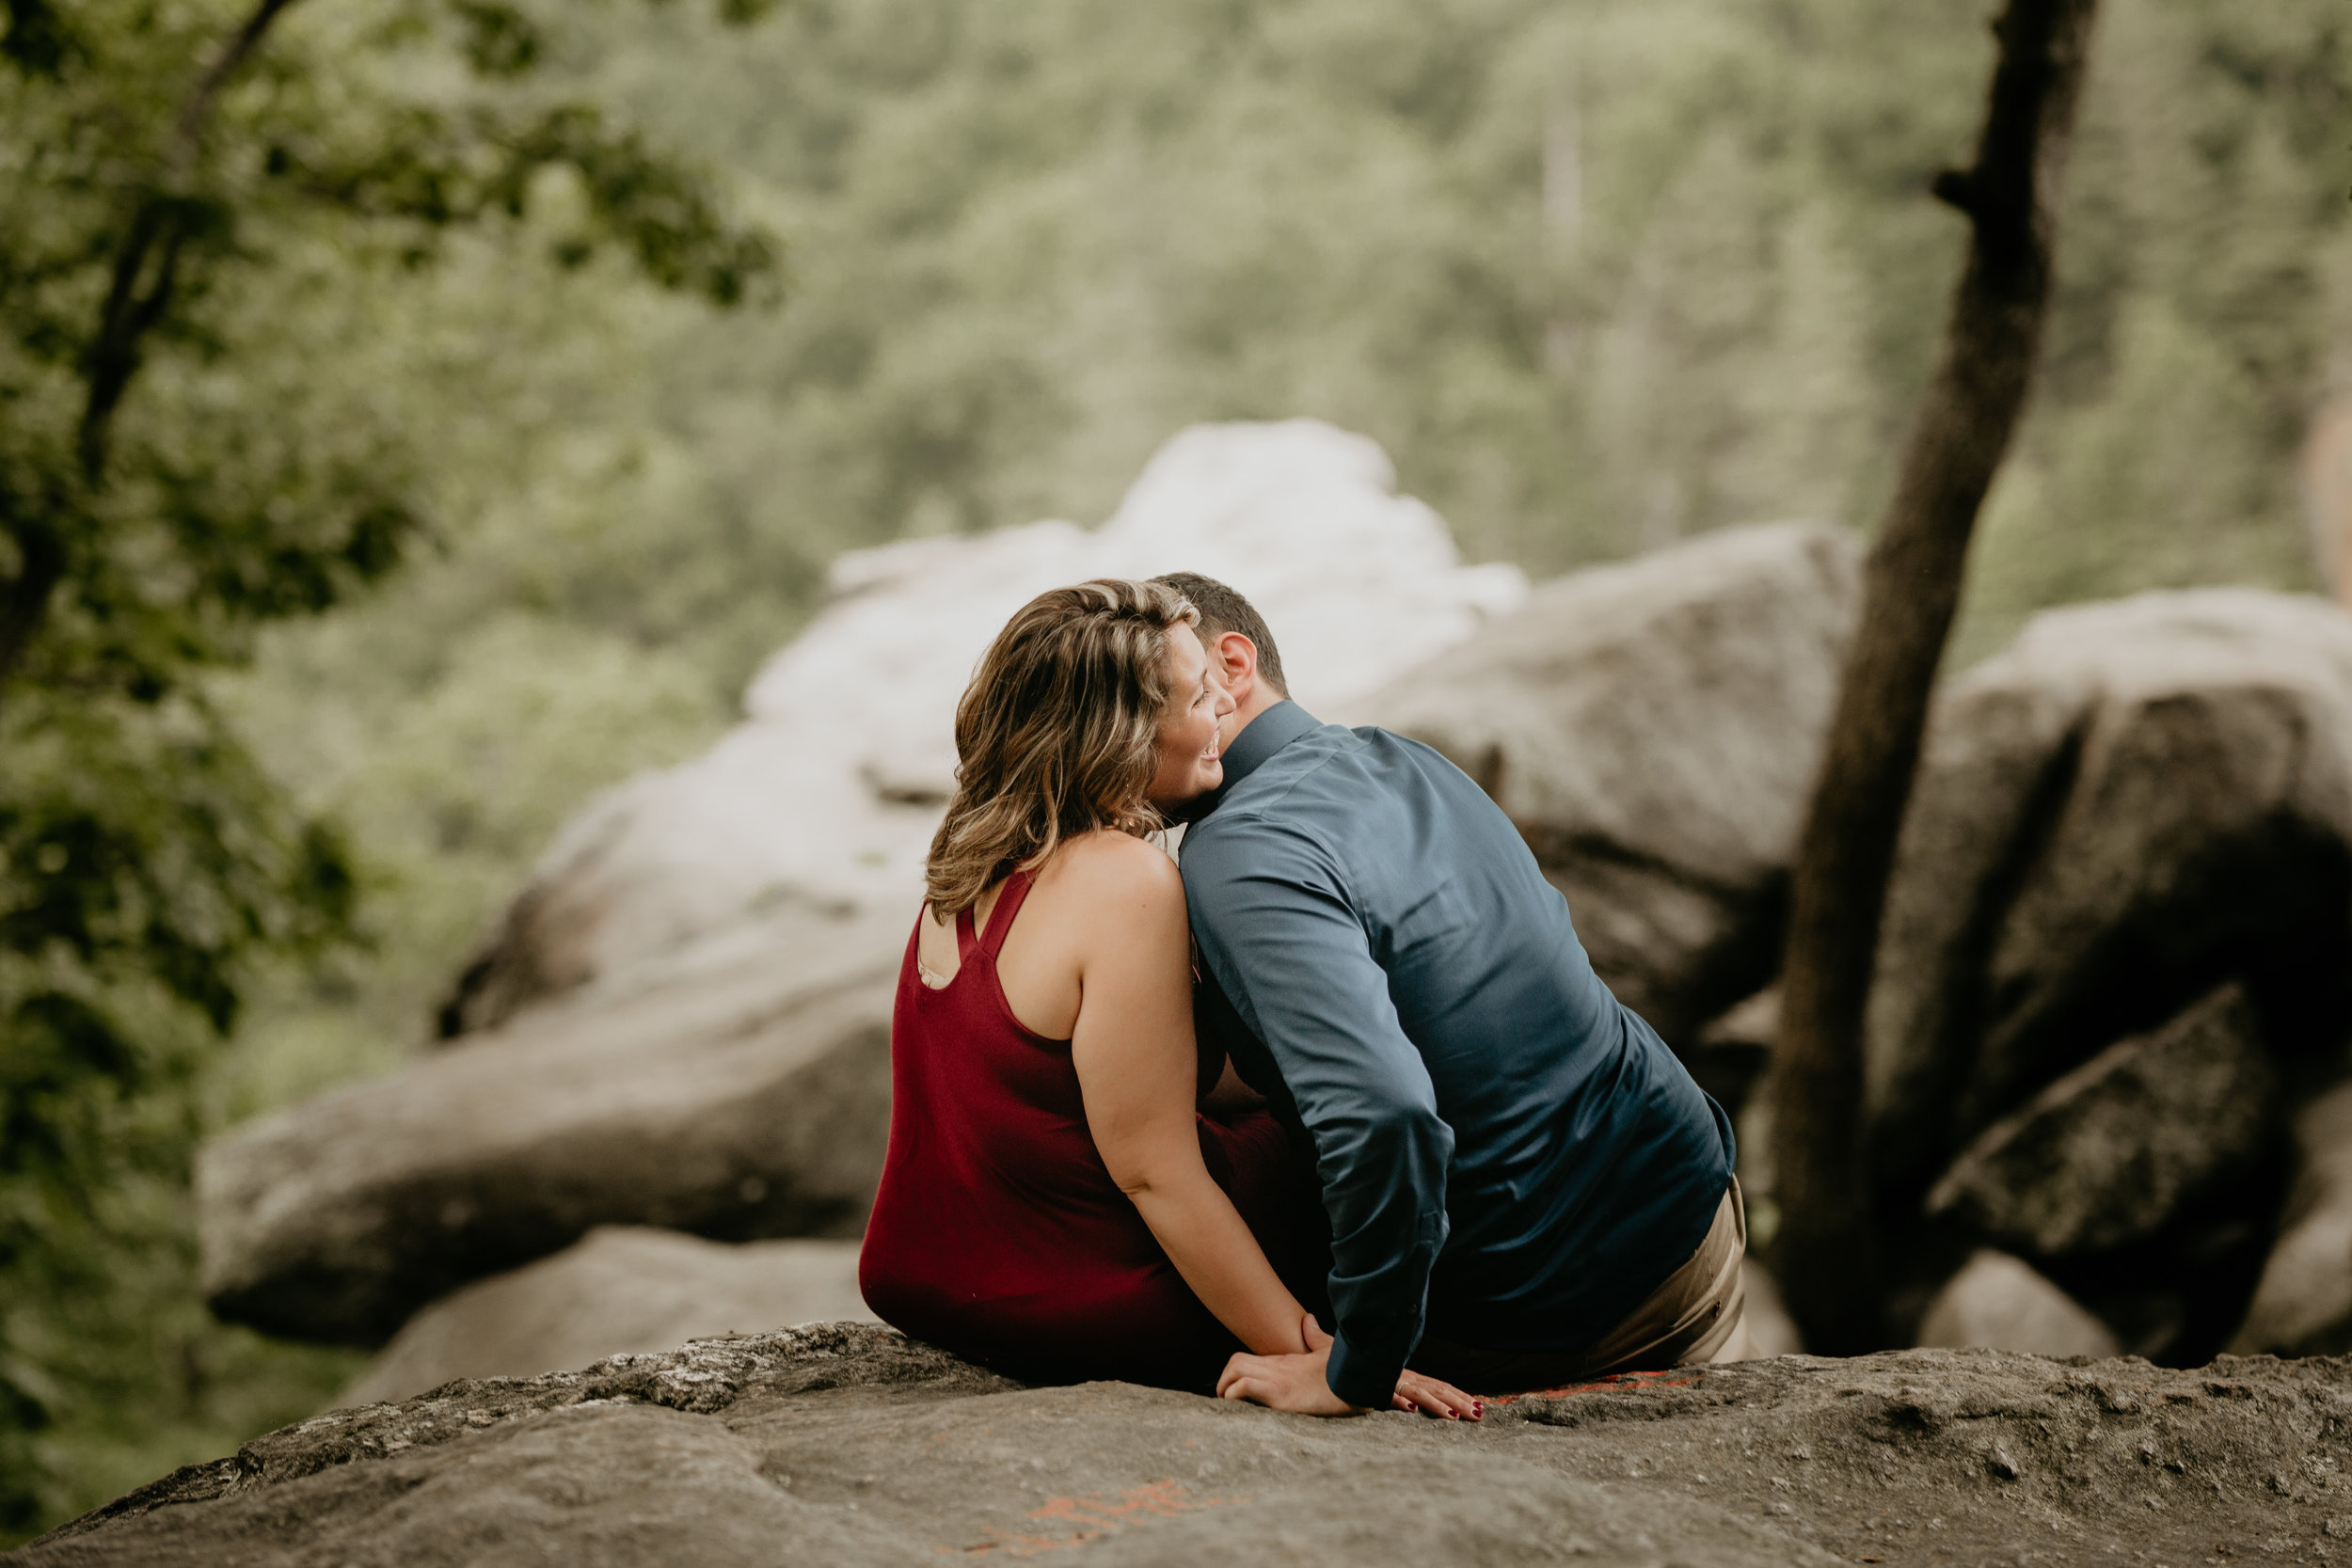 Nicole-Daacke-Photography-rock-state-park-overlook-king-queen-seat-maryland-hiking-adventure-engagement-session-photos-portraits-summer-bel-air-dog-engagement-session-22.jpg